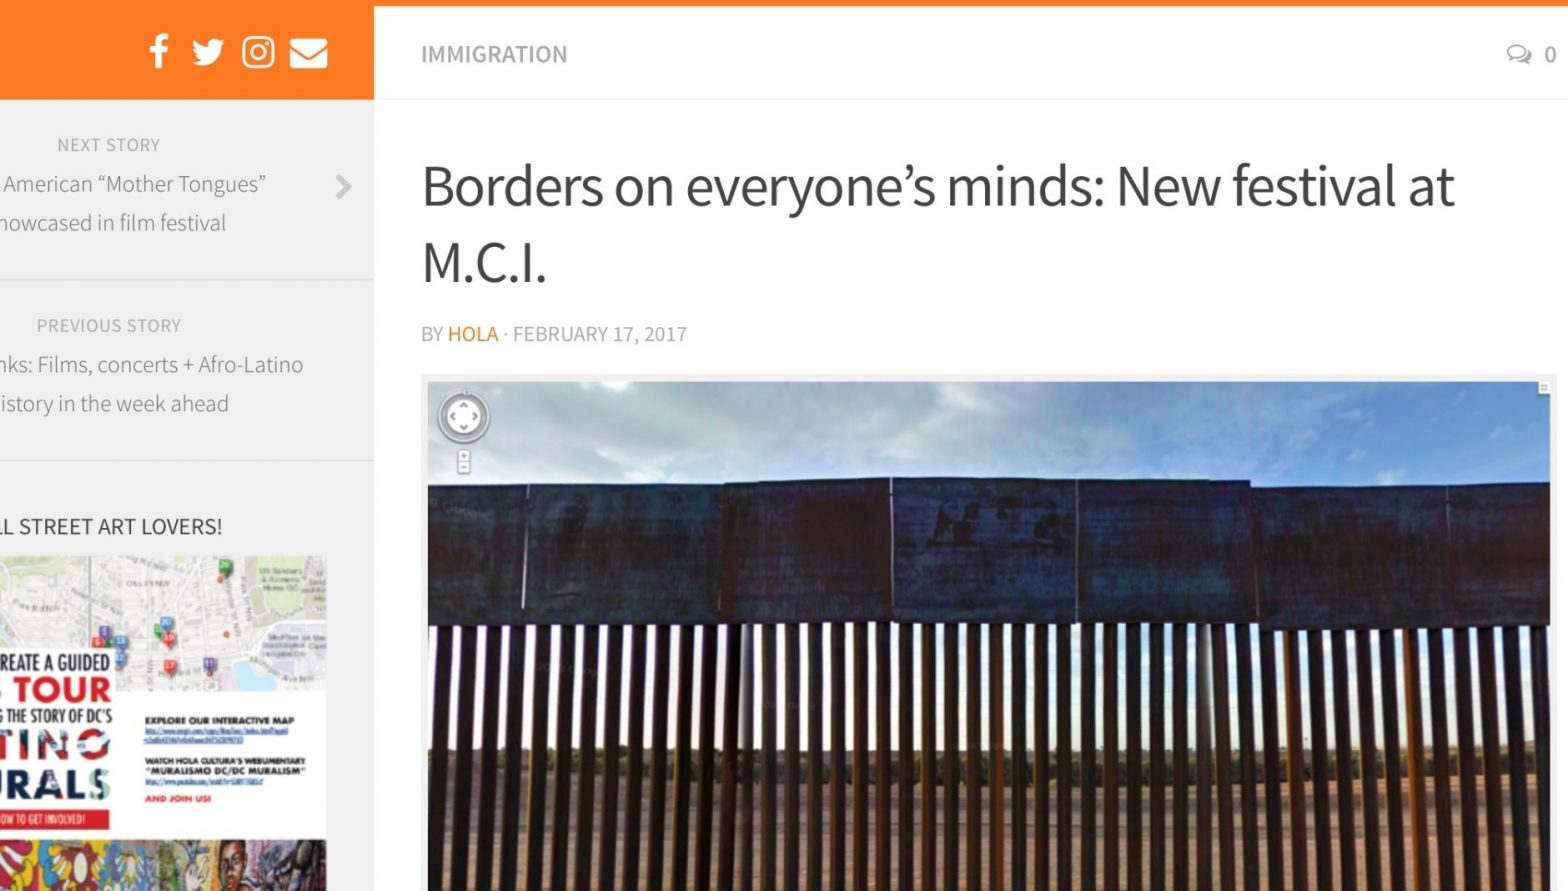 Borders on everyone’s minds: New festival at M.C.I.